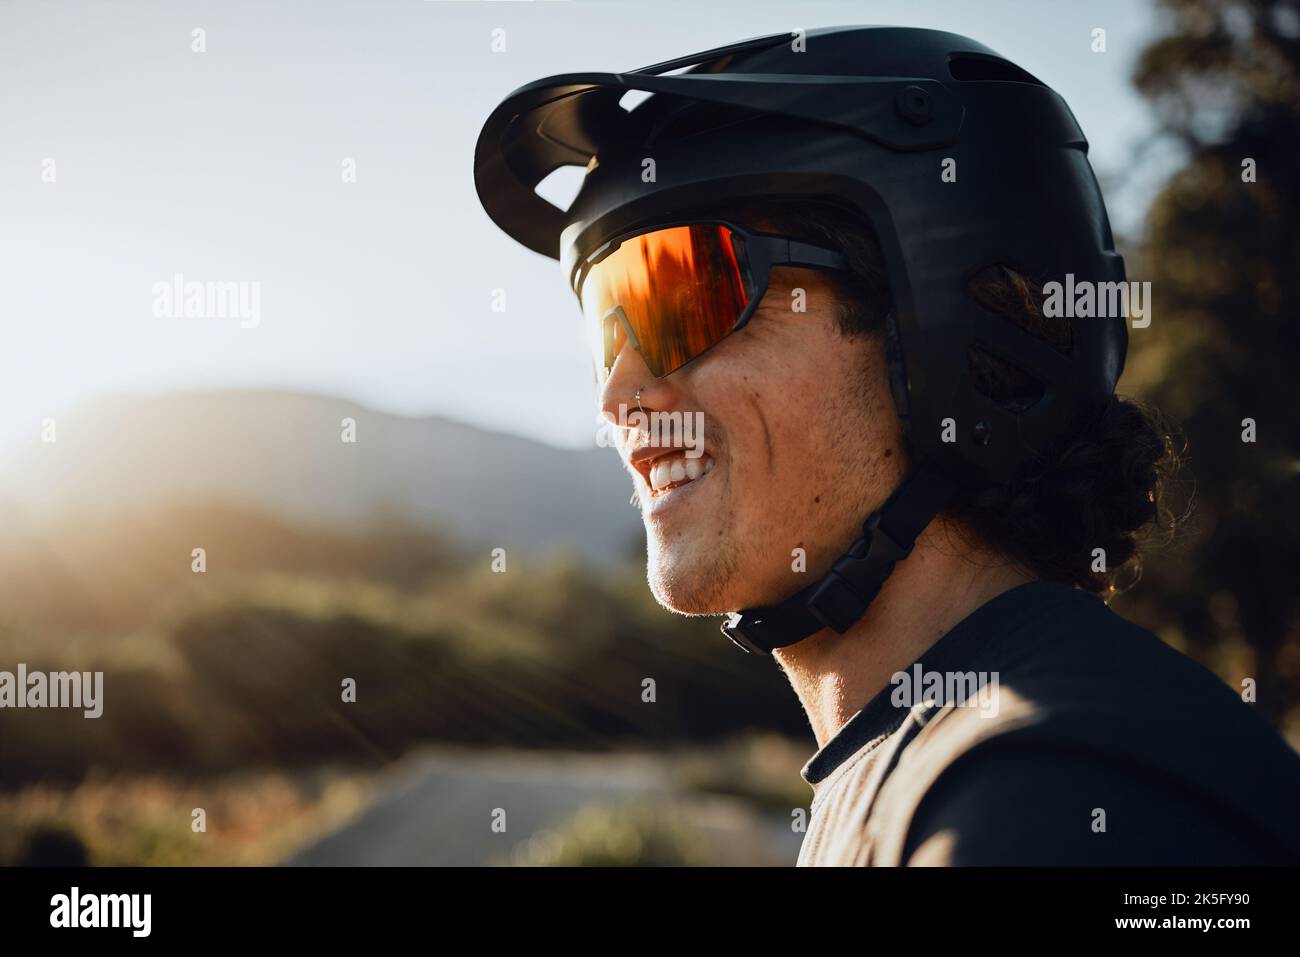 Mountain biking, glasses and helmet for man on adventure in nature